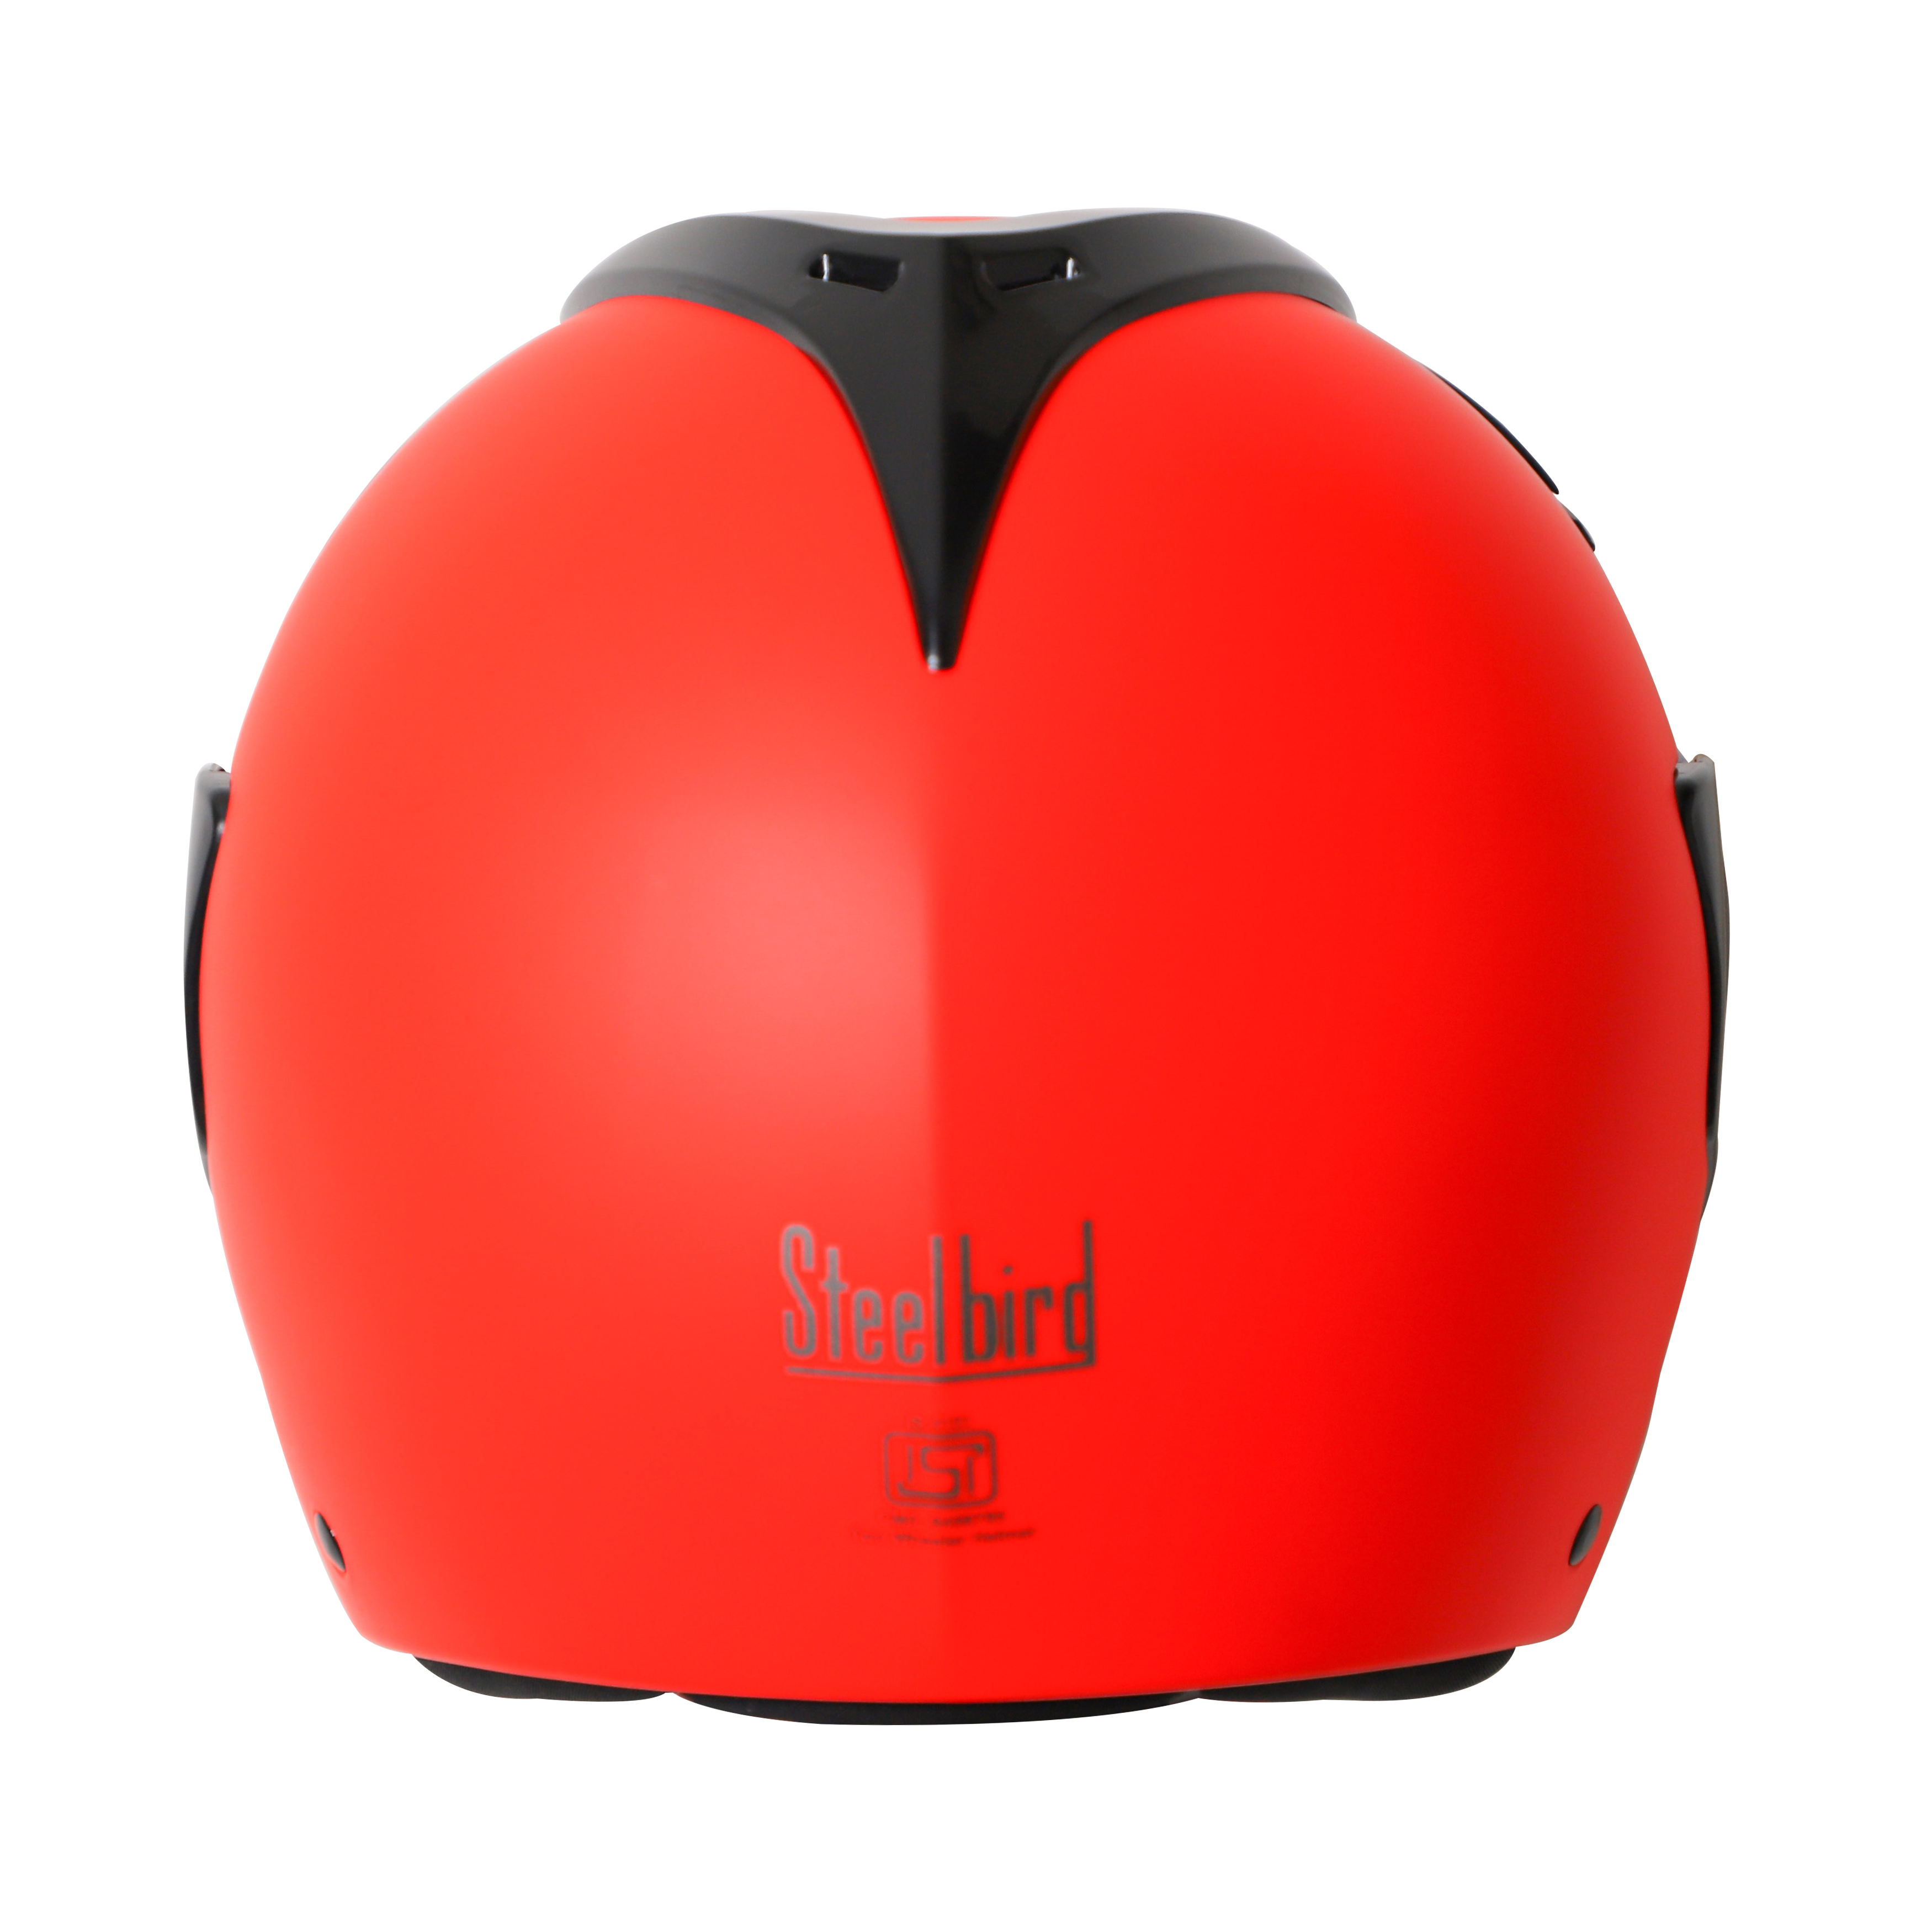 Steelbird SB-34 ISI Certified Flip-Up Helmet For Men And Women (Glossy Fluo Red With Smoke Visor)